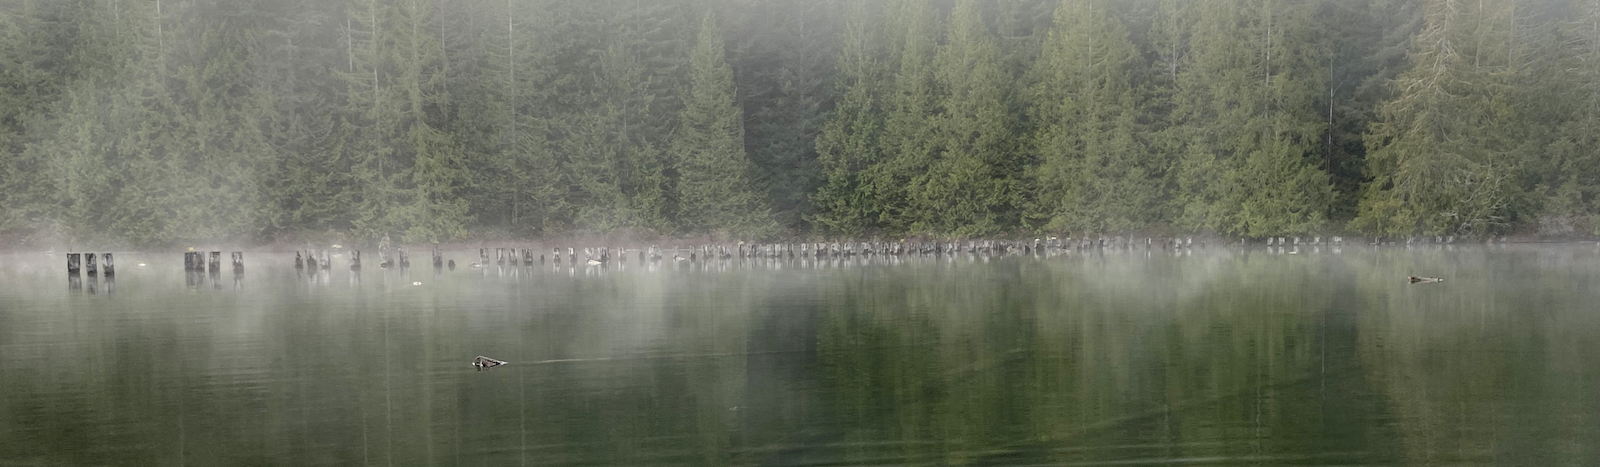 Dozens of evenly spaced, cylindrical wooden poles jut out of the clear, calm water in a foggy lake.